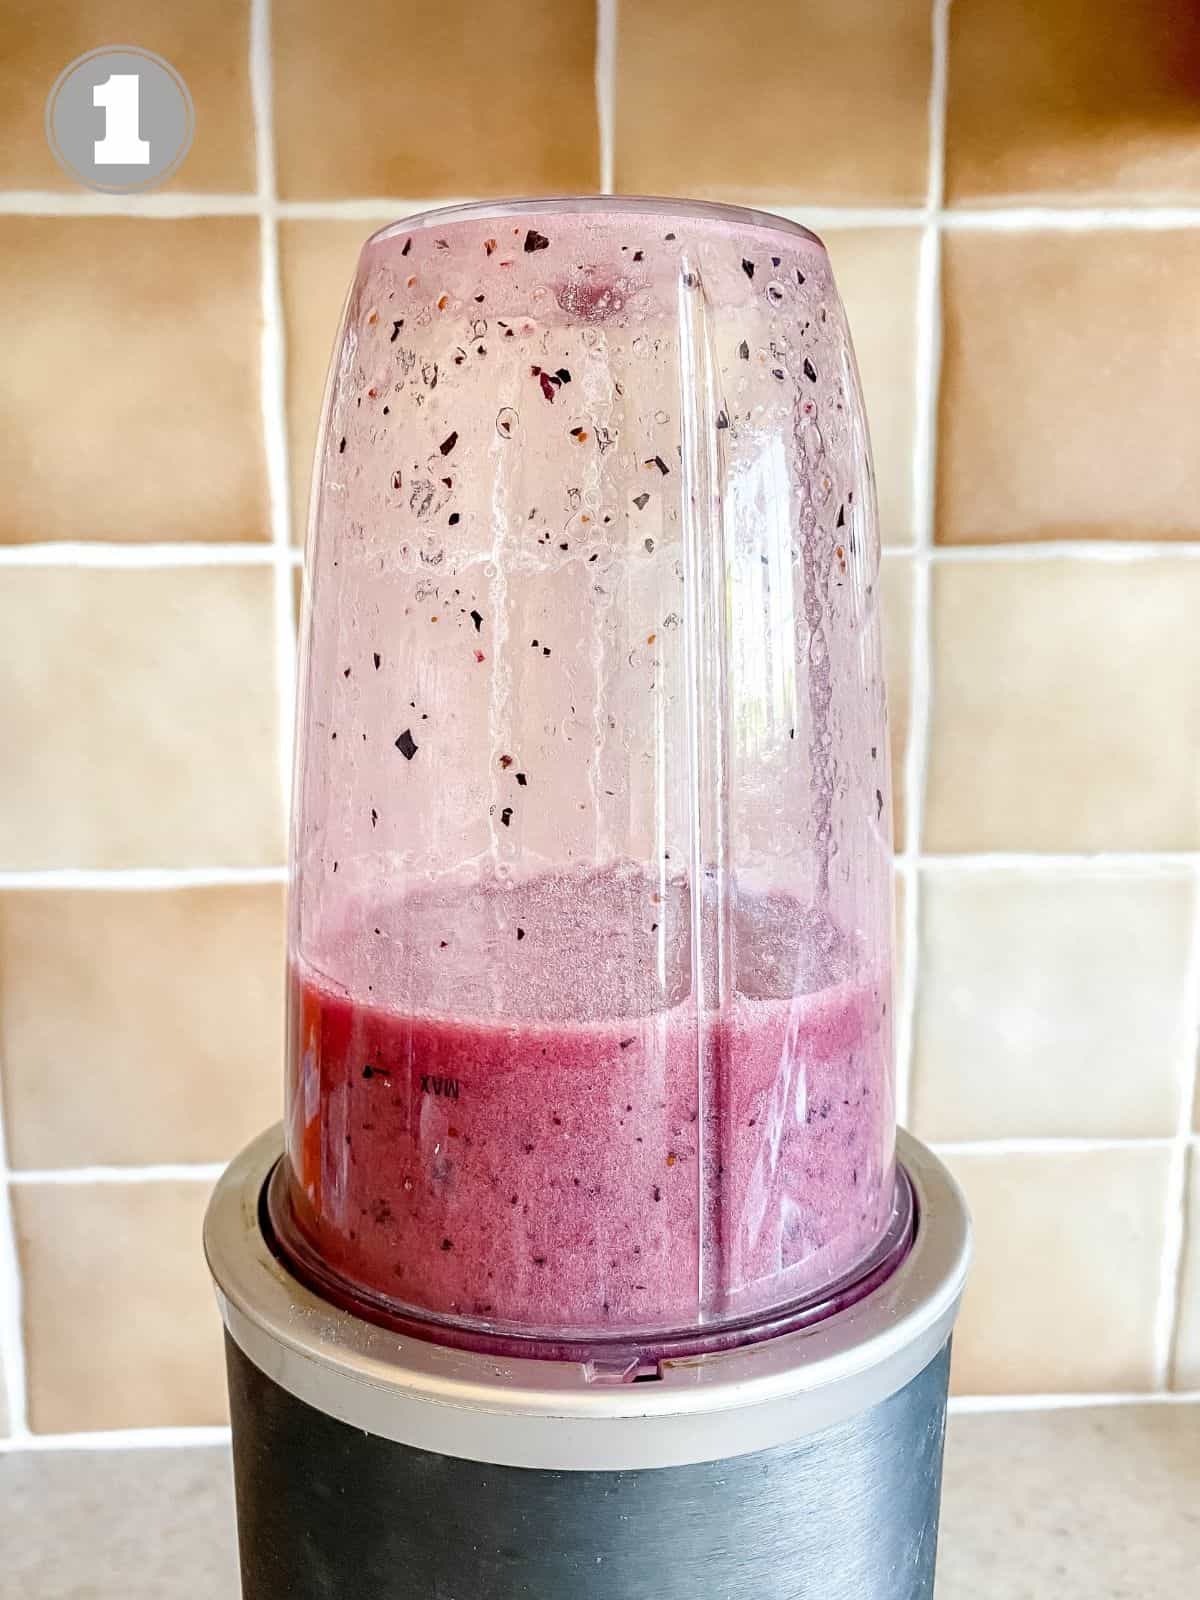 blueberry agua fresca in a blender with number one in the corner.